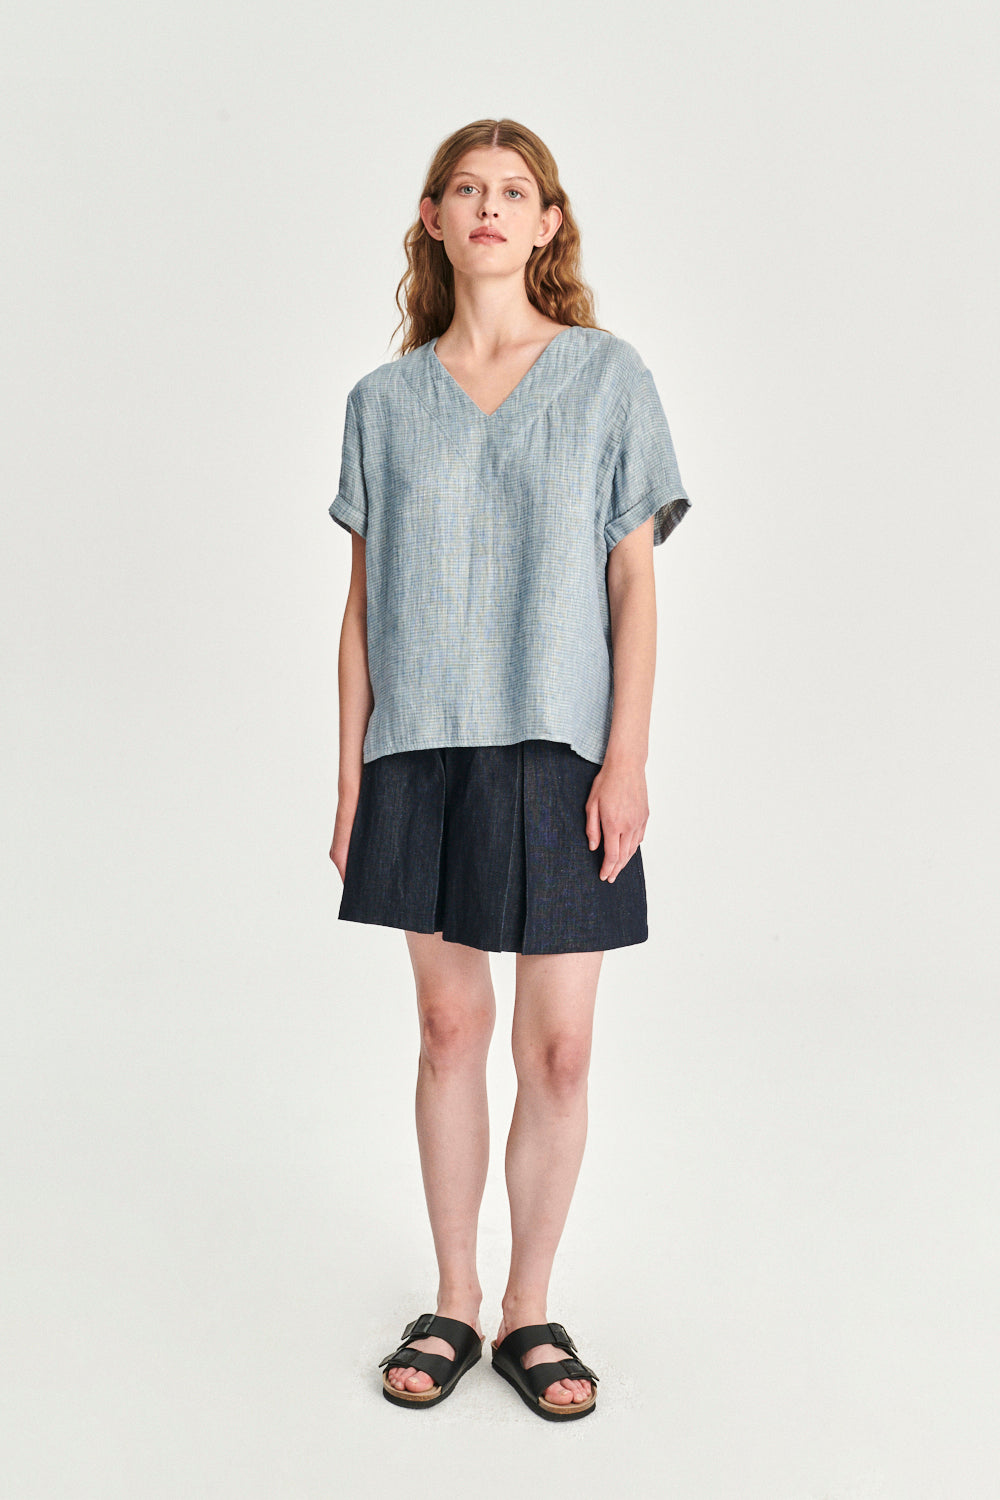 Relaxed Top in a Double Sided Blue Fatigue Italian Linen